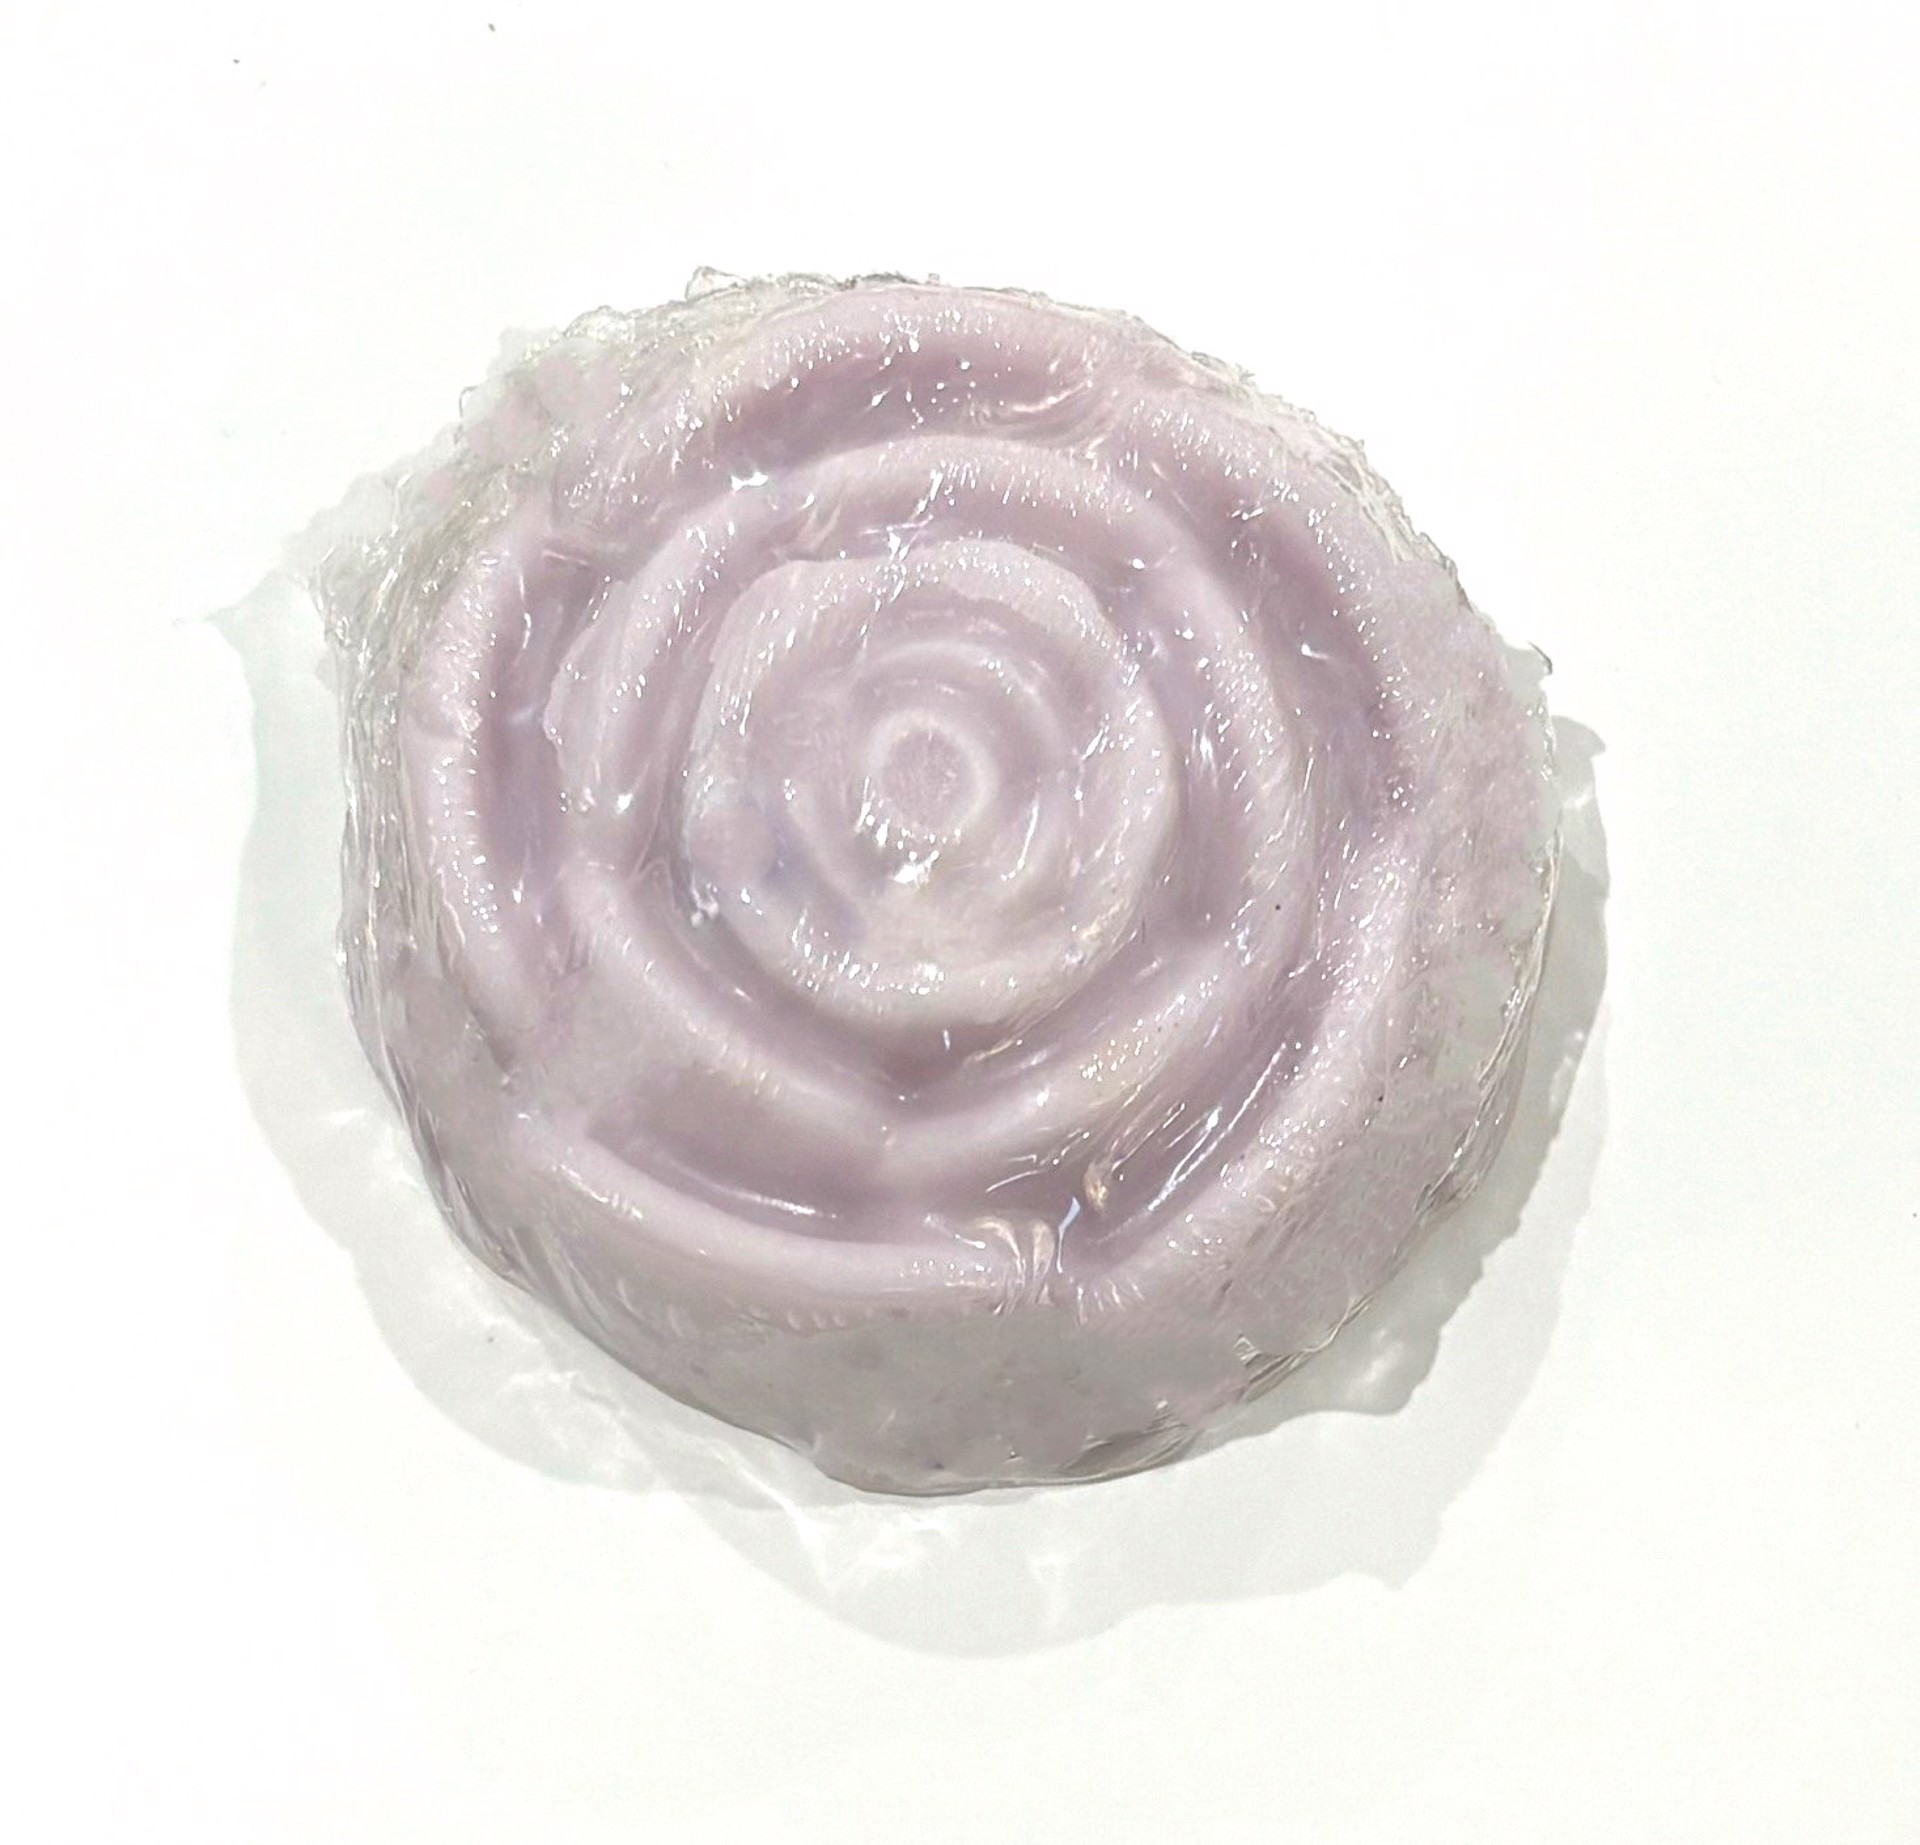 Lavender Lullaby Rose Shaped Soap by The Honeysuckle Barn